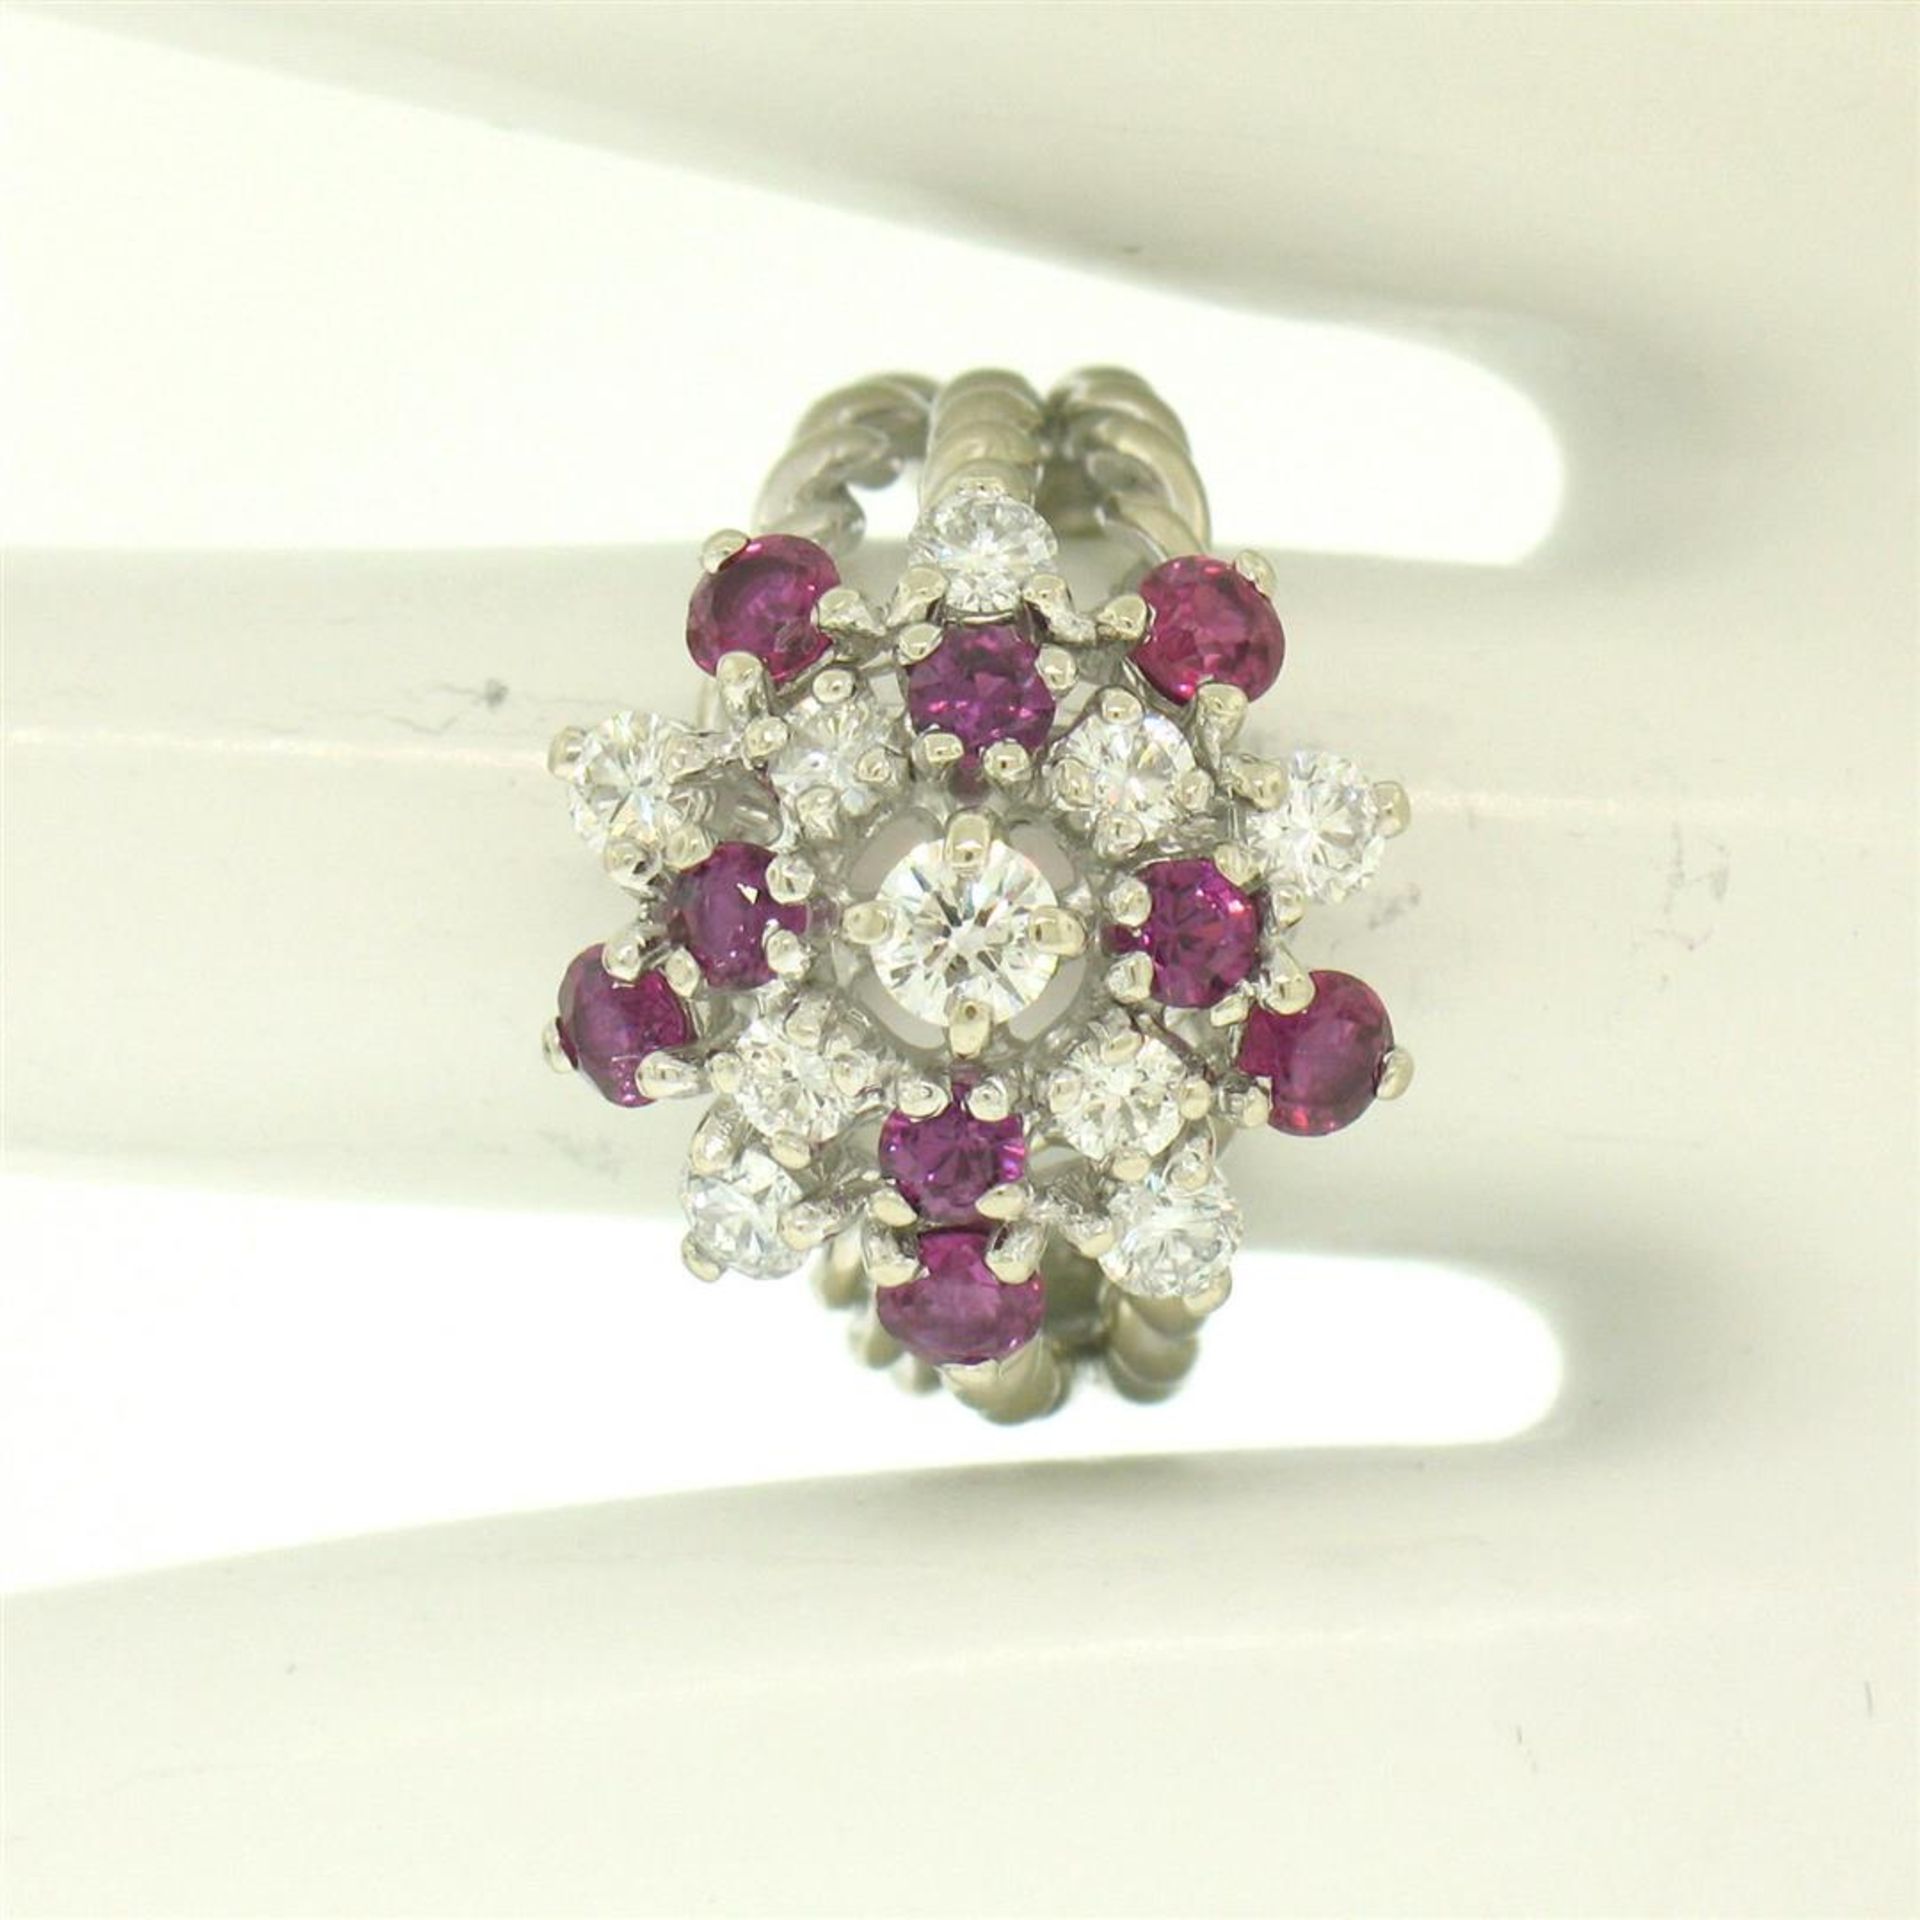 14K White Gold 2.10 ctw Diamond & Ruby Cluster Daisy Twisted Wire Cocktail Ring - Image 9 of 9